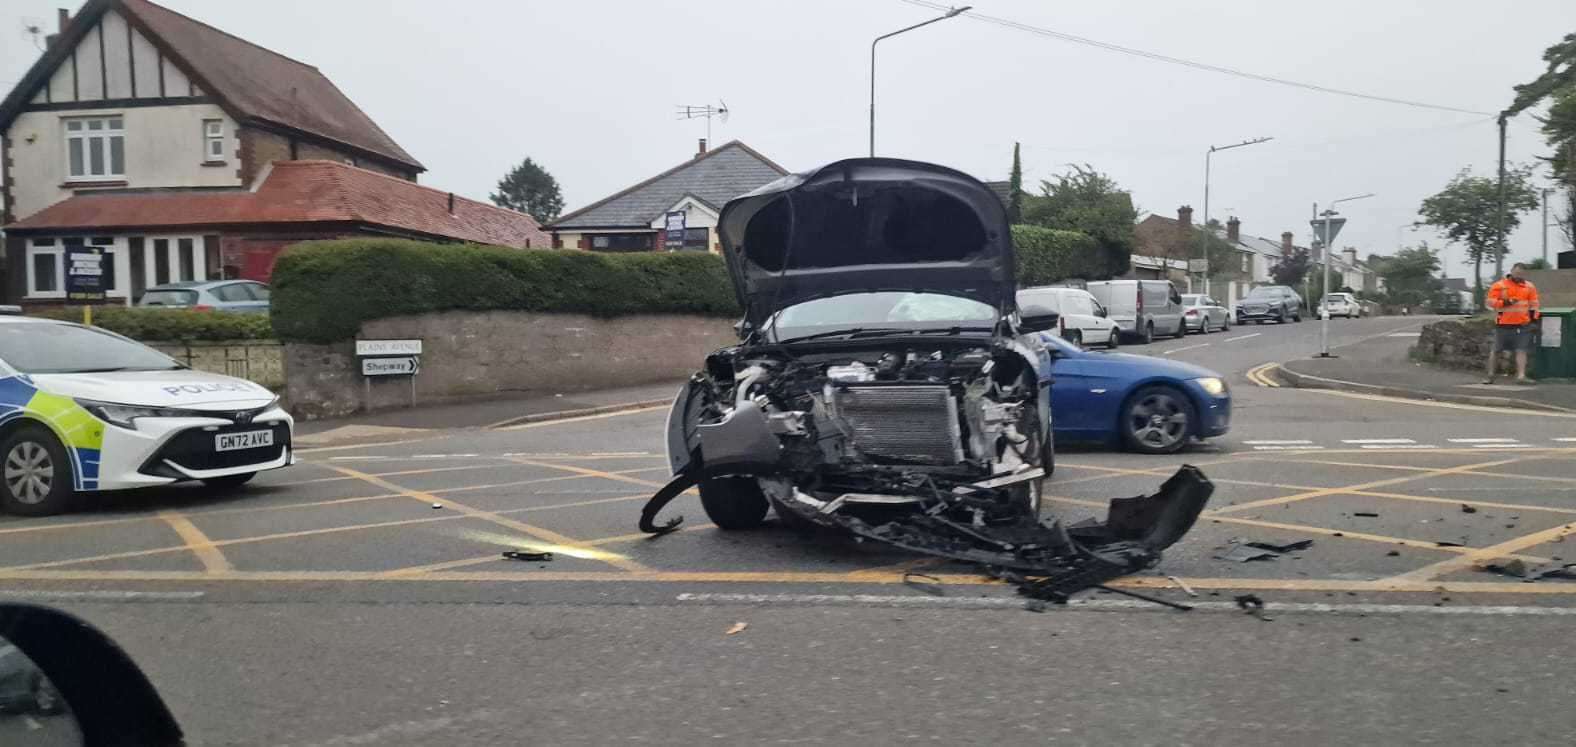 The Plains Avenue junction has not been entirely accident-free. This two-car crash happened towards the end of August